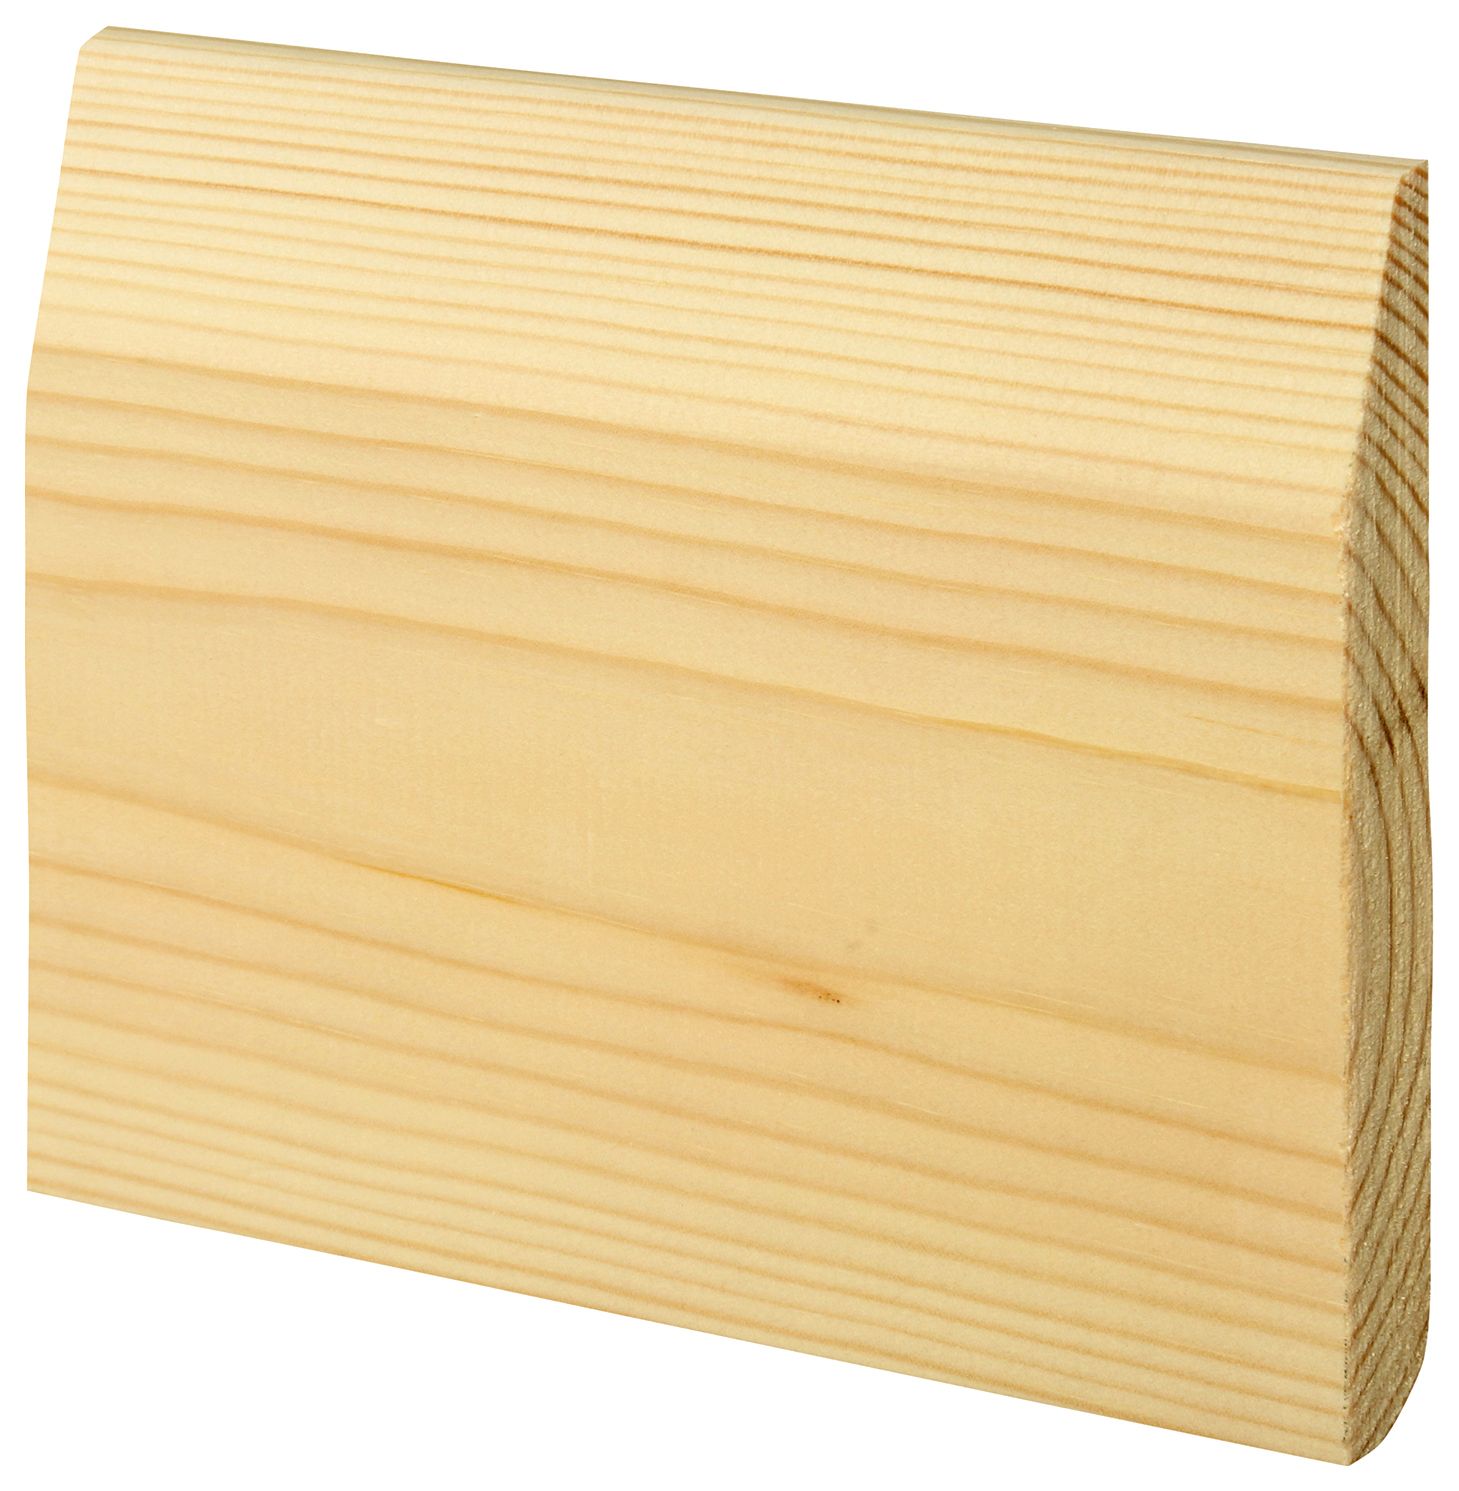 Image of Wickes Chamfered / Bullnose Natural Pine Skirting - 19 x 119 x 4200mm